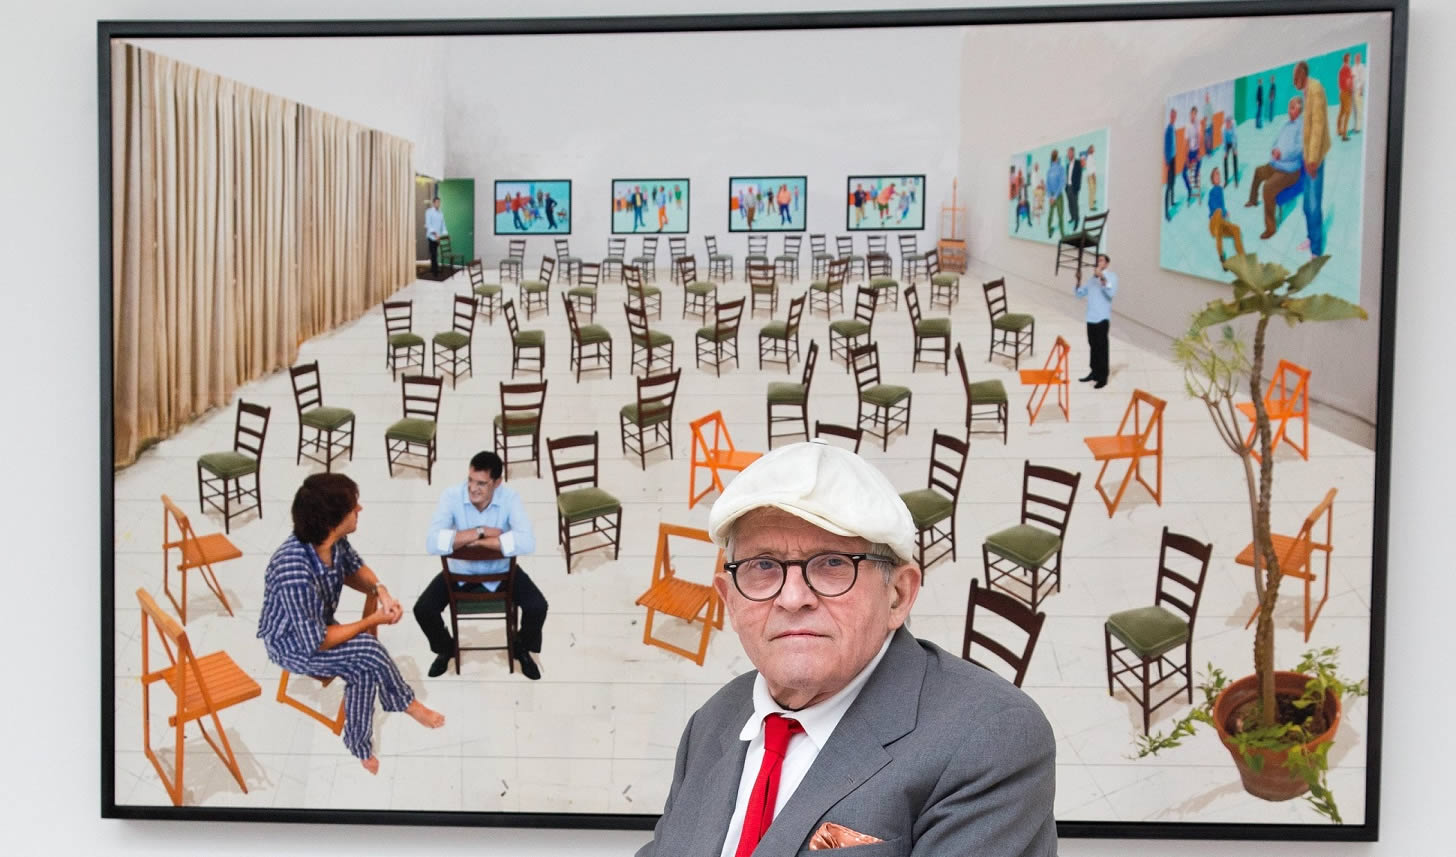 Image name david hockney credit tommy london alamy stock photo header the 12 image from the post David Hockney at 80 in Yorkshire.com.